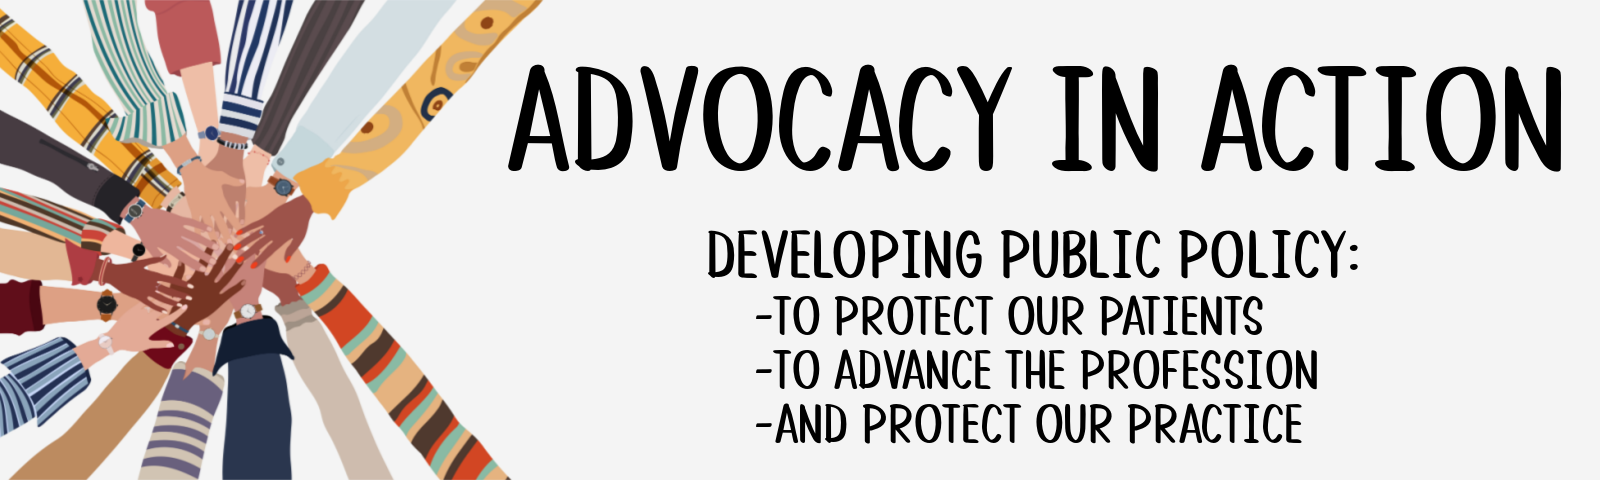 Advocacy in Action: Developing policy to protect our patients, advance the profession ad protect our practice